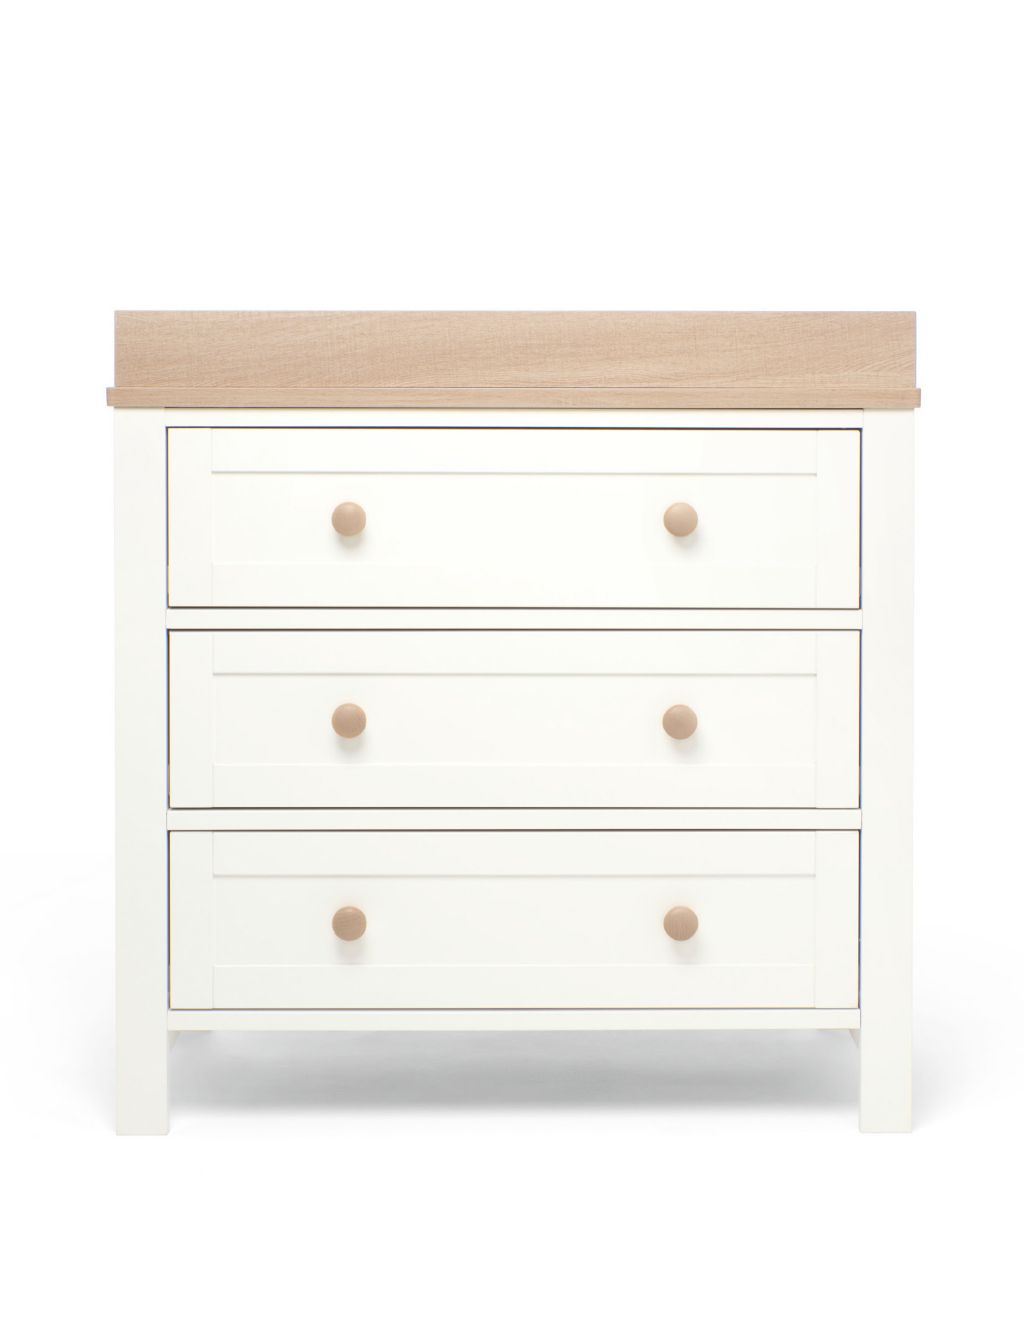 Wedmore 2 Piece Cotbed Set with Dresser image 5